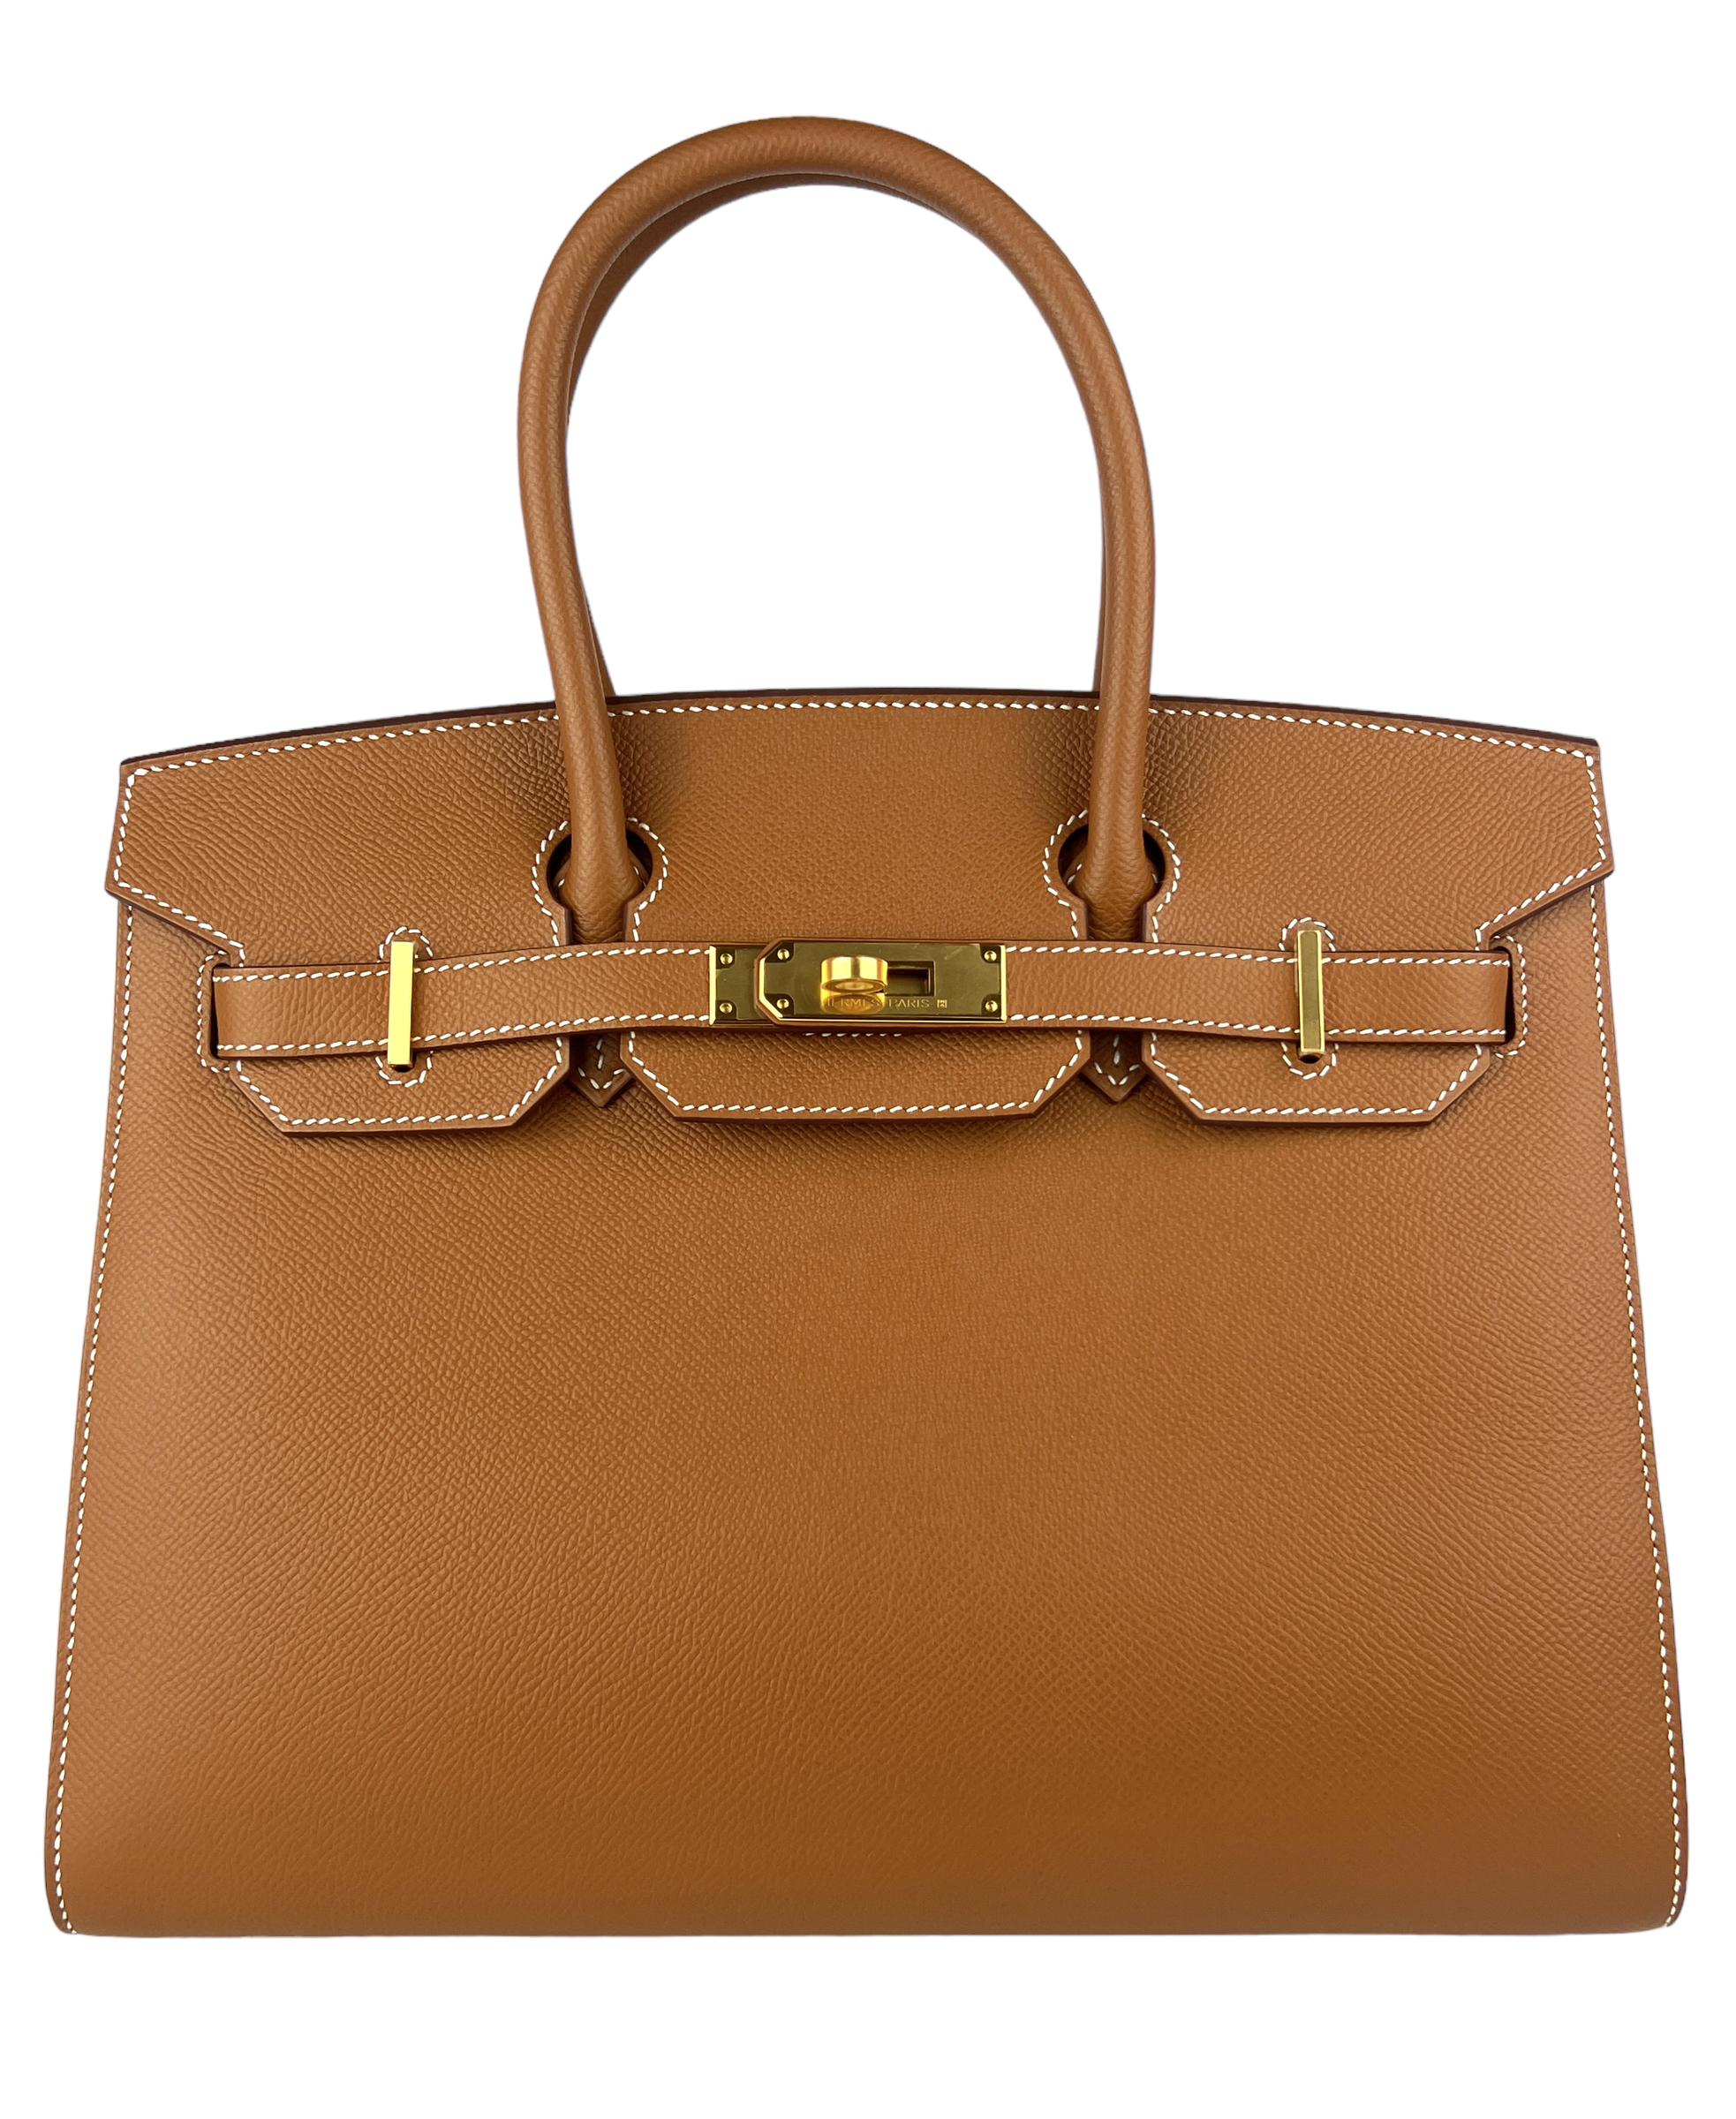 As New Absolutely Stunning Rare Limited Edition Hermes Birkin 30 Sellier Gold Epsom Leather.Complimented by Epsom Leather and Palladium Hardware. Y Stamp 2020. 

Please see Photo 10 Bag has minor marks on the bottom interior from the couchette, lock